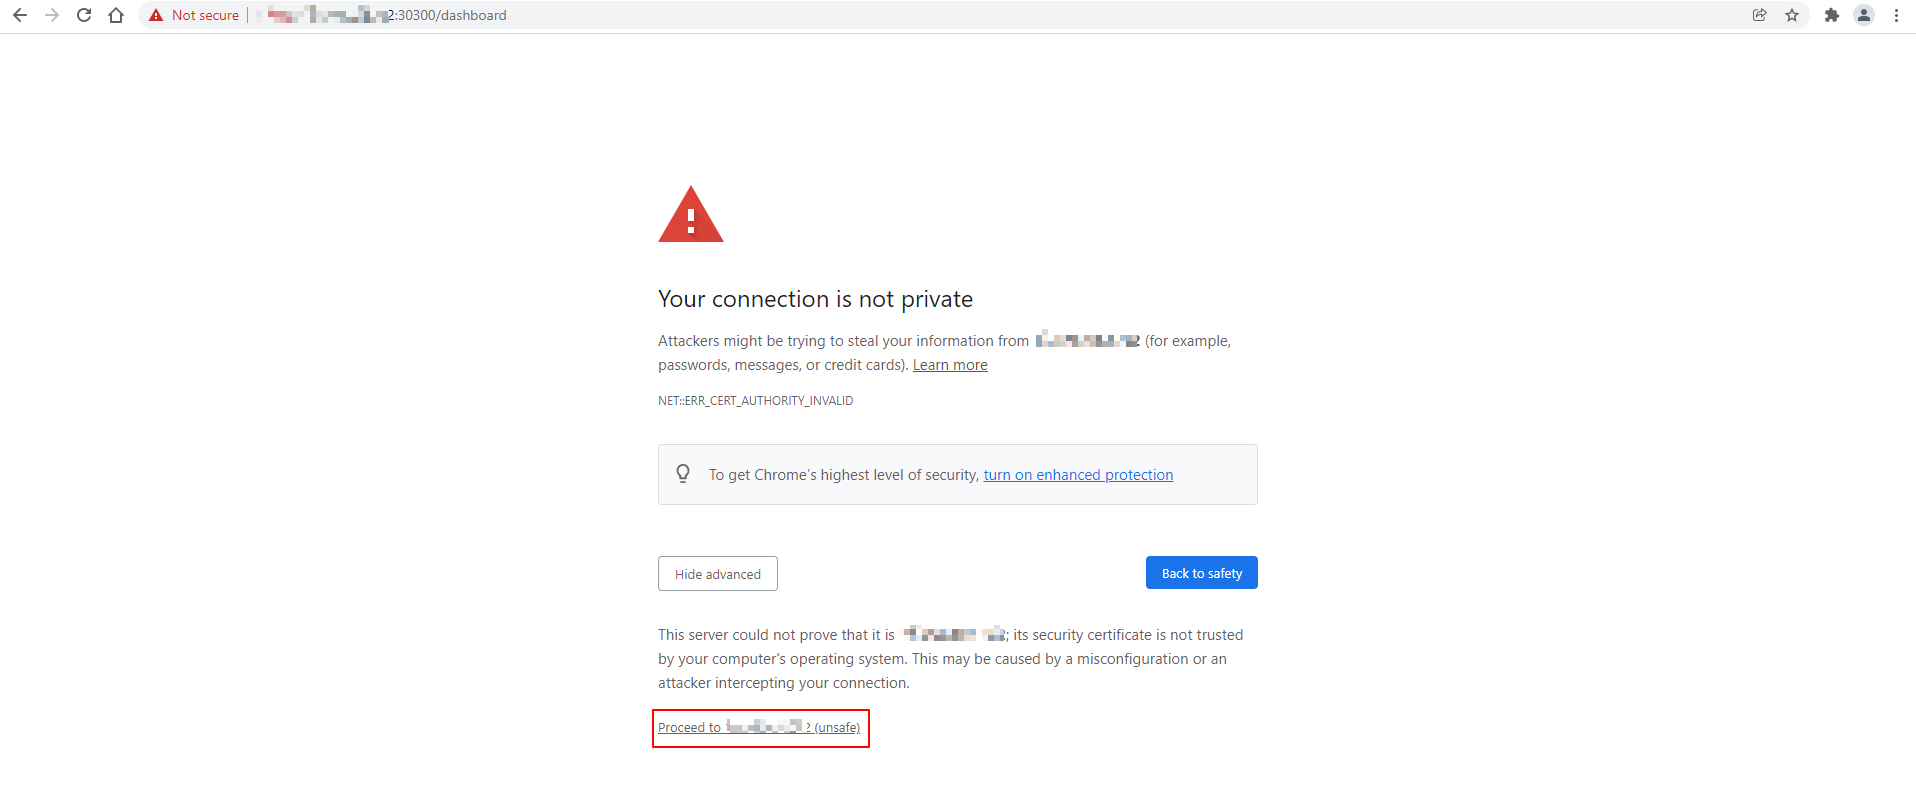 A browser window using the WNR-ITM dashboard URL and showing a warning message “Your connection is not private”. The option to Proceed to the website is outlined in red, indicating you should click the link.